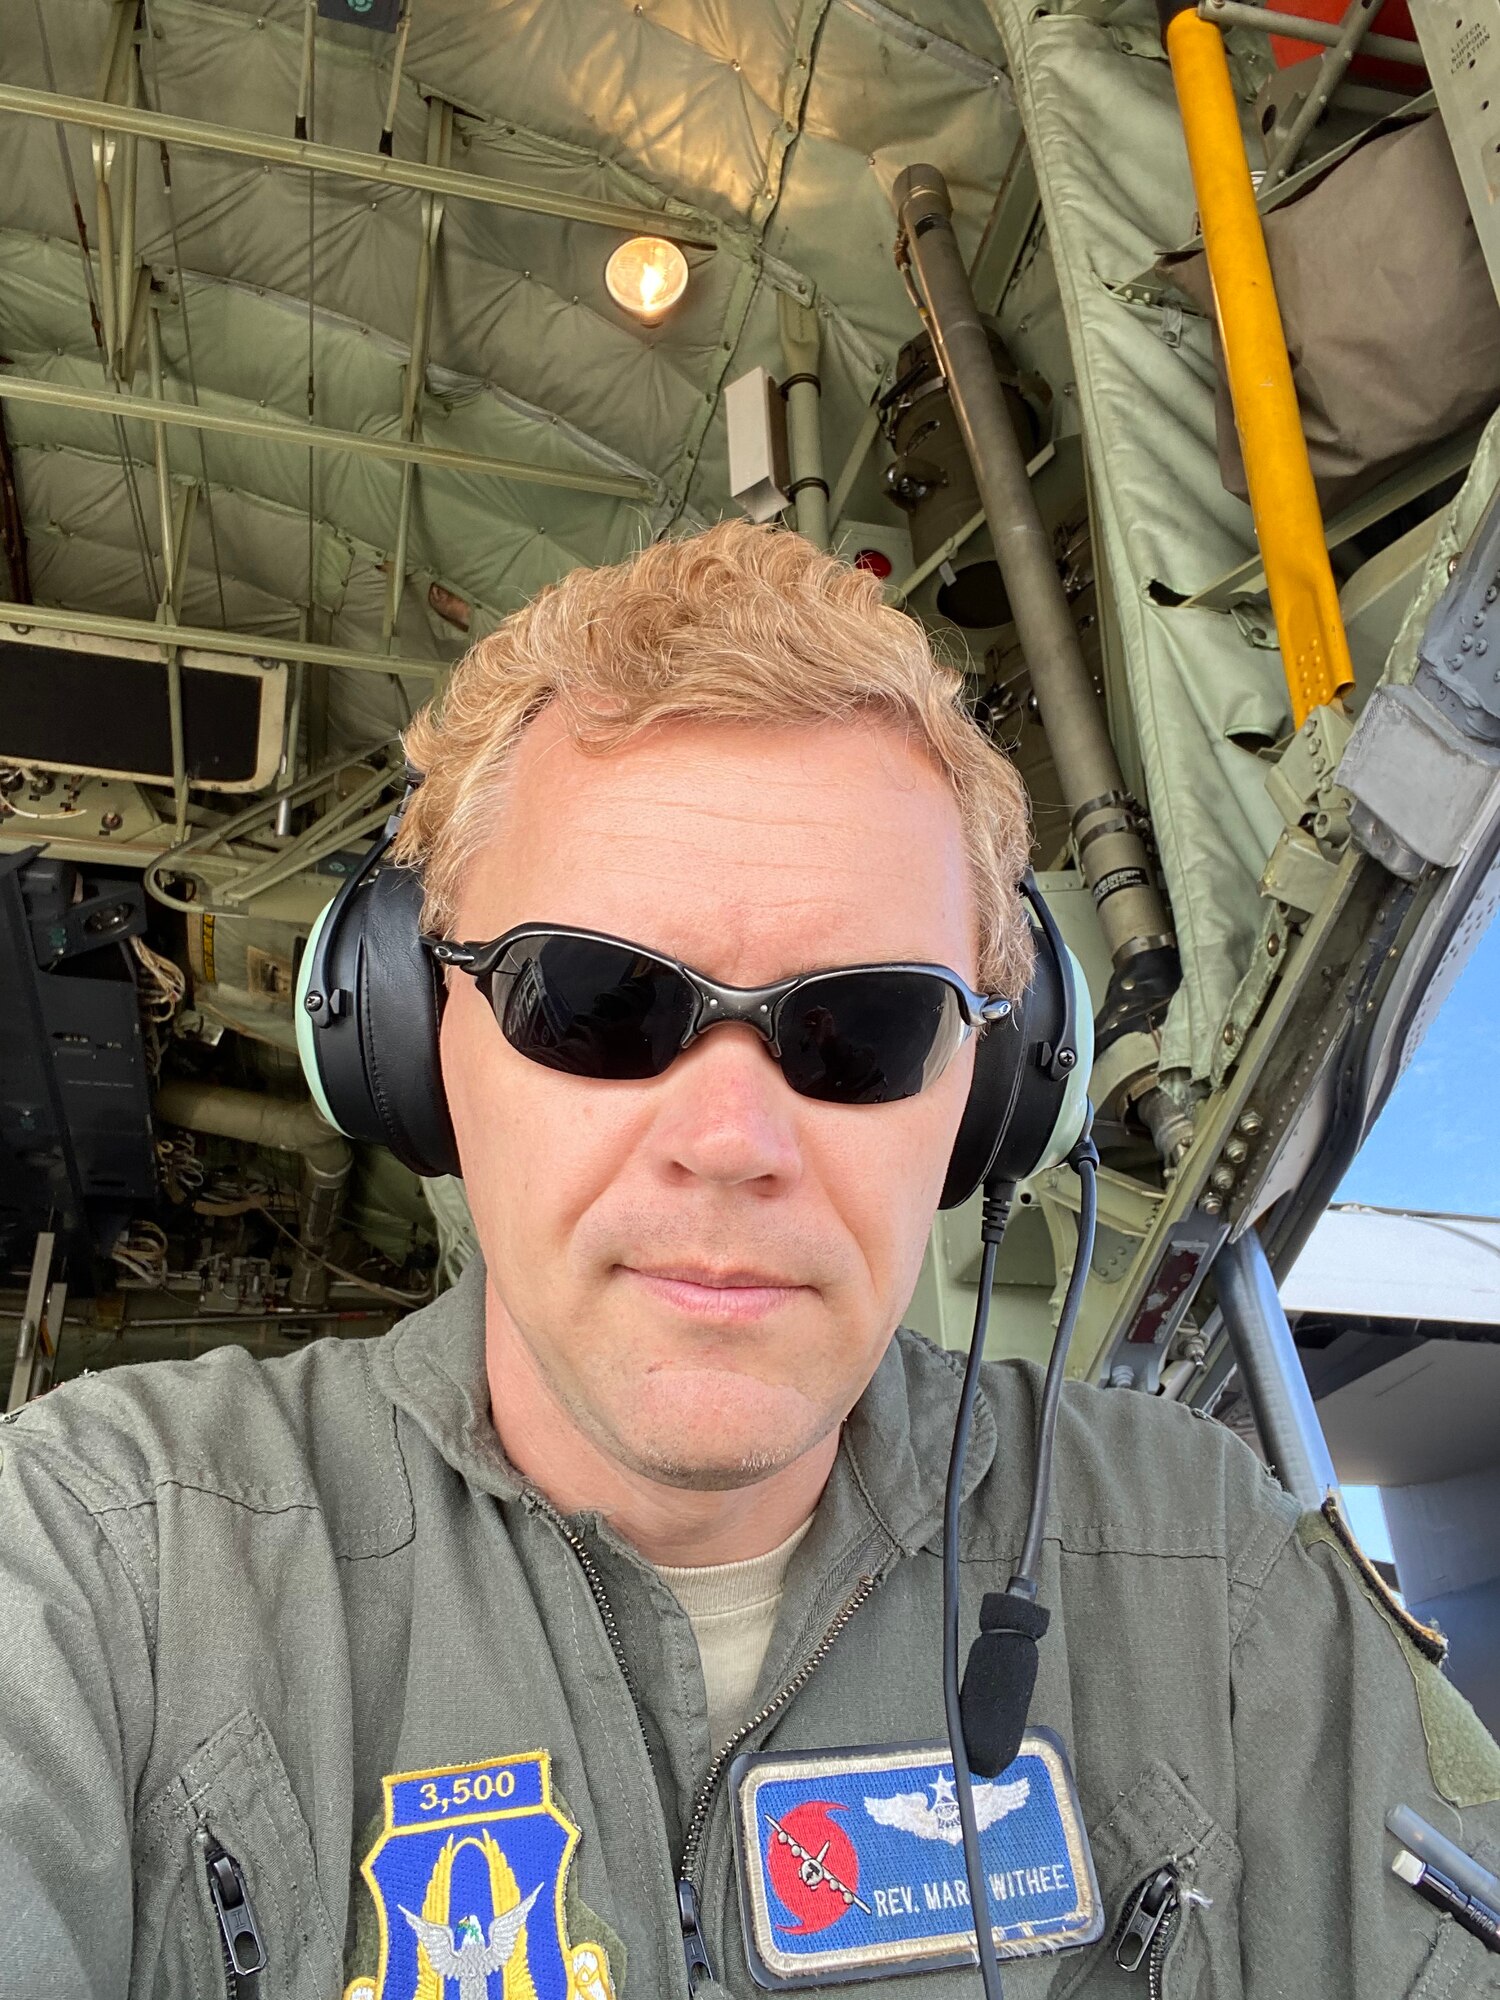 Maj. Mark Withee, 53rd Weather Reconnaissance Squadron navigator, has been flying with the Air Force Reserve for five years and has more than 3,600 flight hours in the C-130. He said that his most memorable storm was a night flight during Hurricane Michael, because as they were tracking it, the Hurricane was rapidly intensifying and made his job that much more busy and exciting due to the constant changes in flightpaths as the storm neared land. (U.S. Air Force photo by Maj. Mark Withee)